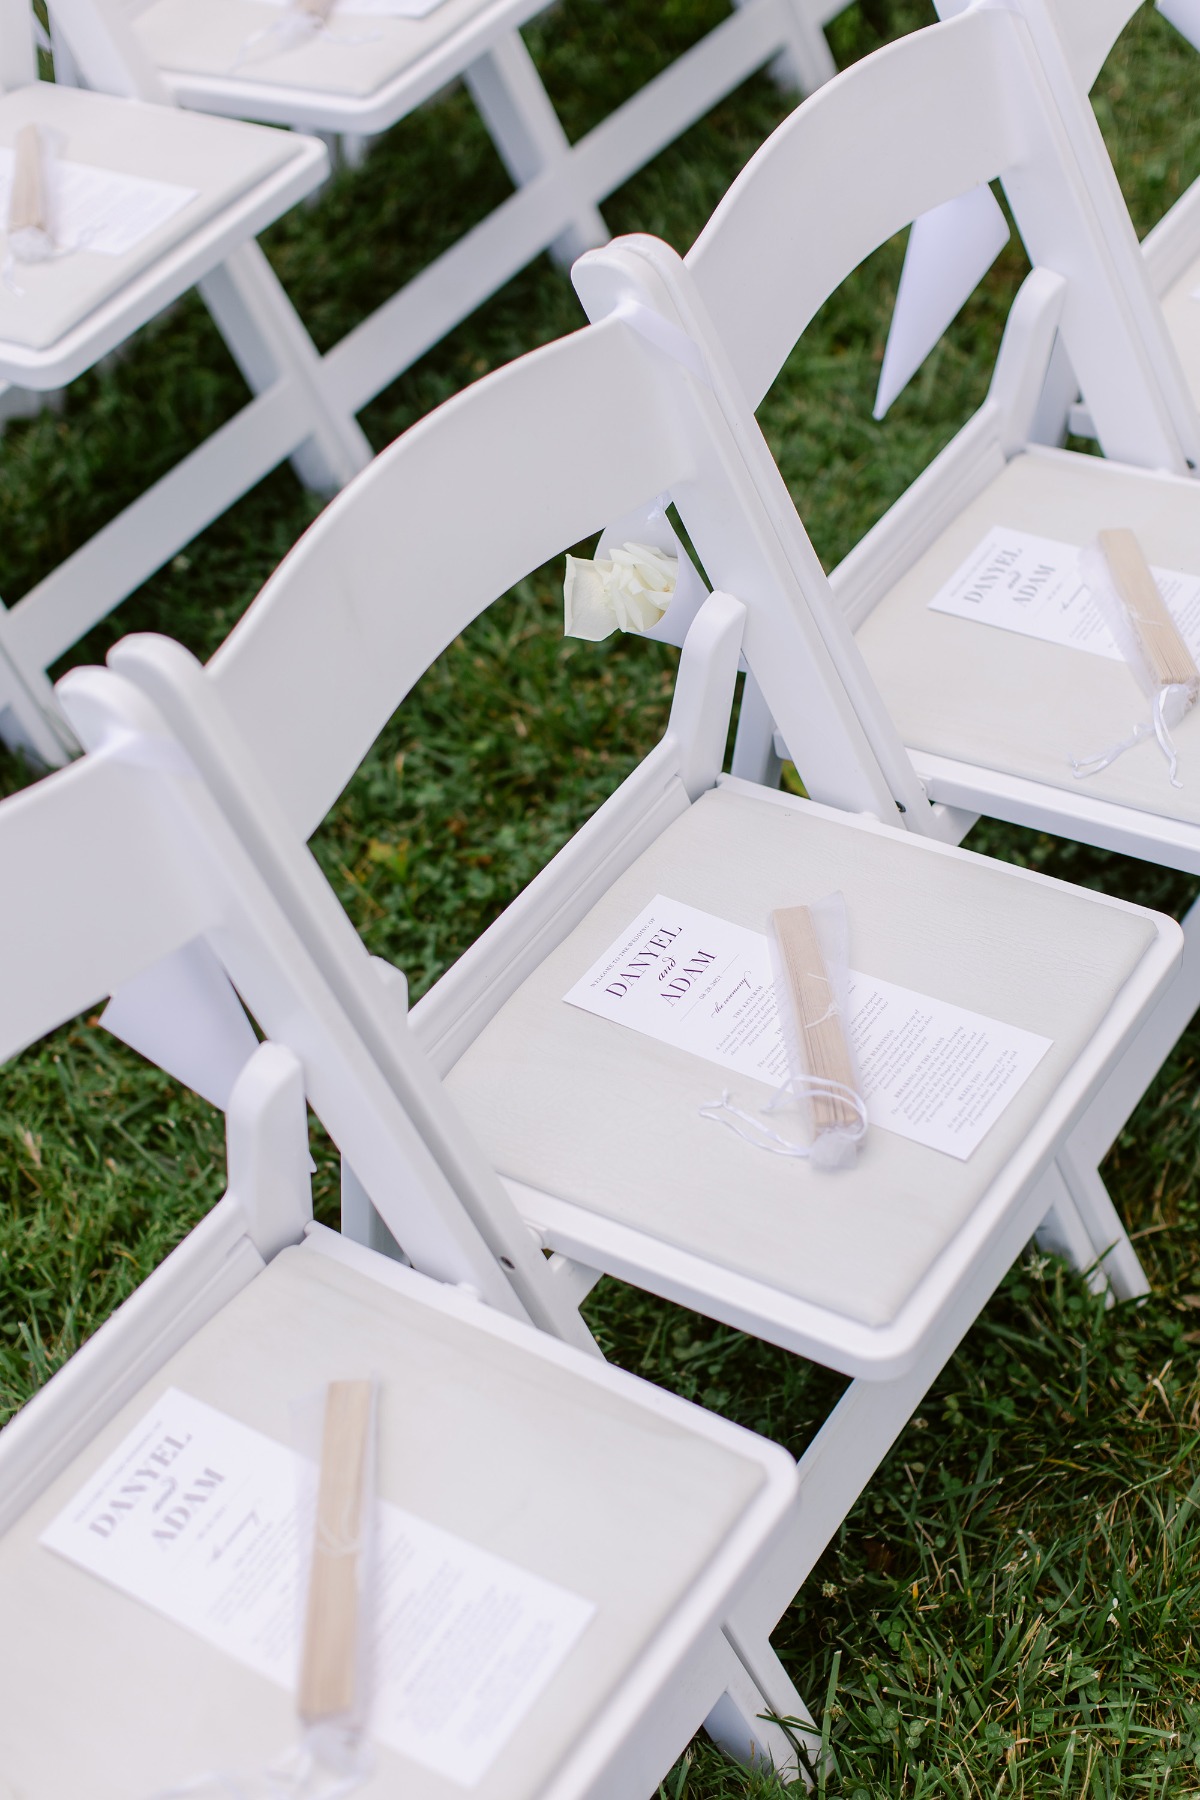 Ceremony chairs and program